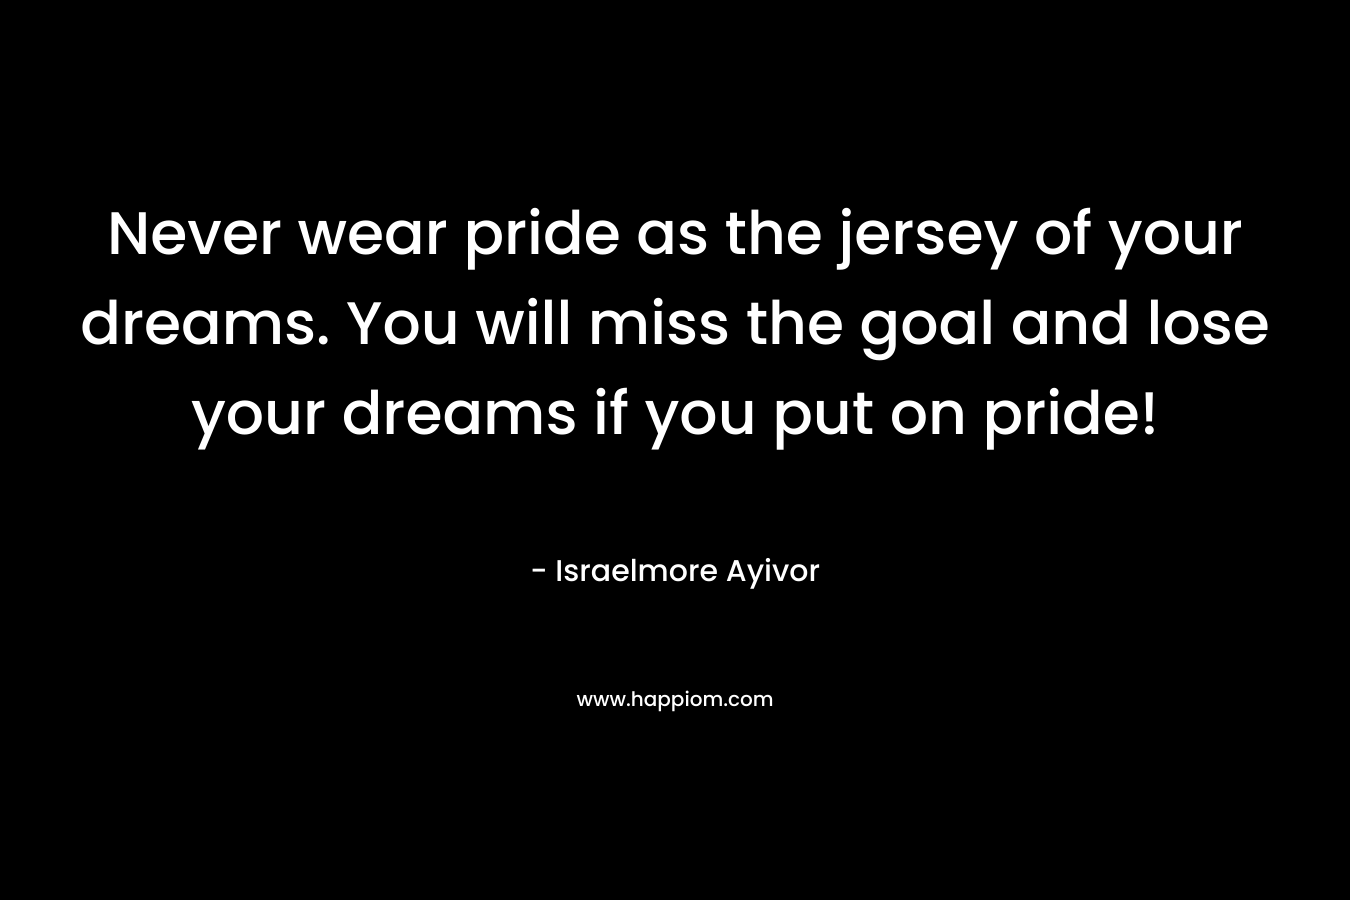 Never wear pride as the jersey of your dreams. You will miss the goal and lose your dreams if you put on pride!